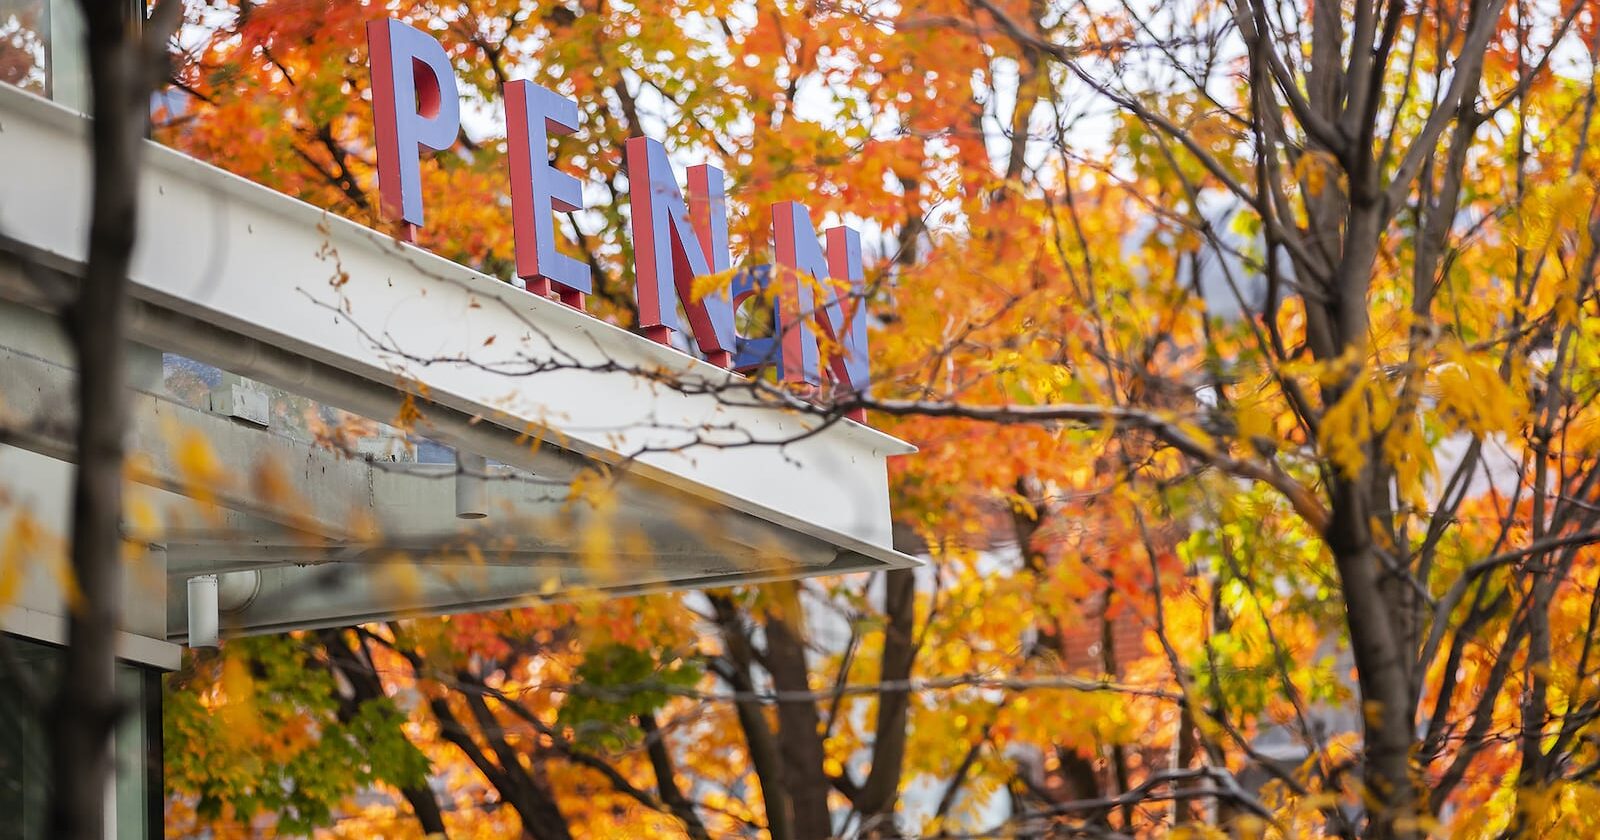 Building with Penn sign in the midst of autumn scenery